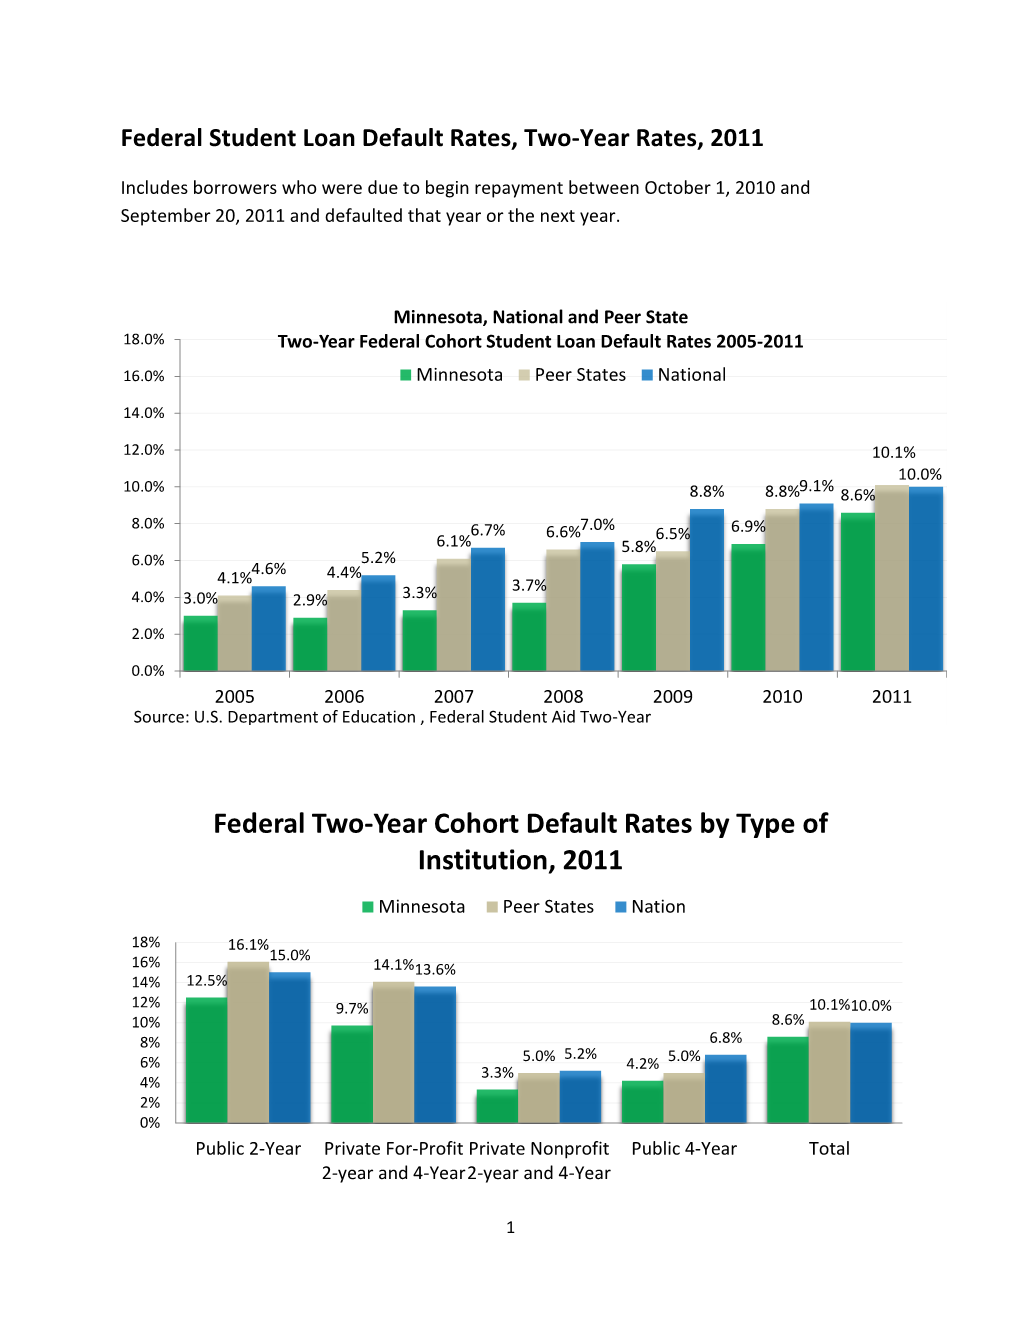 Federal Two-Year Cohort Default Rates by Type of Institution, 2011